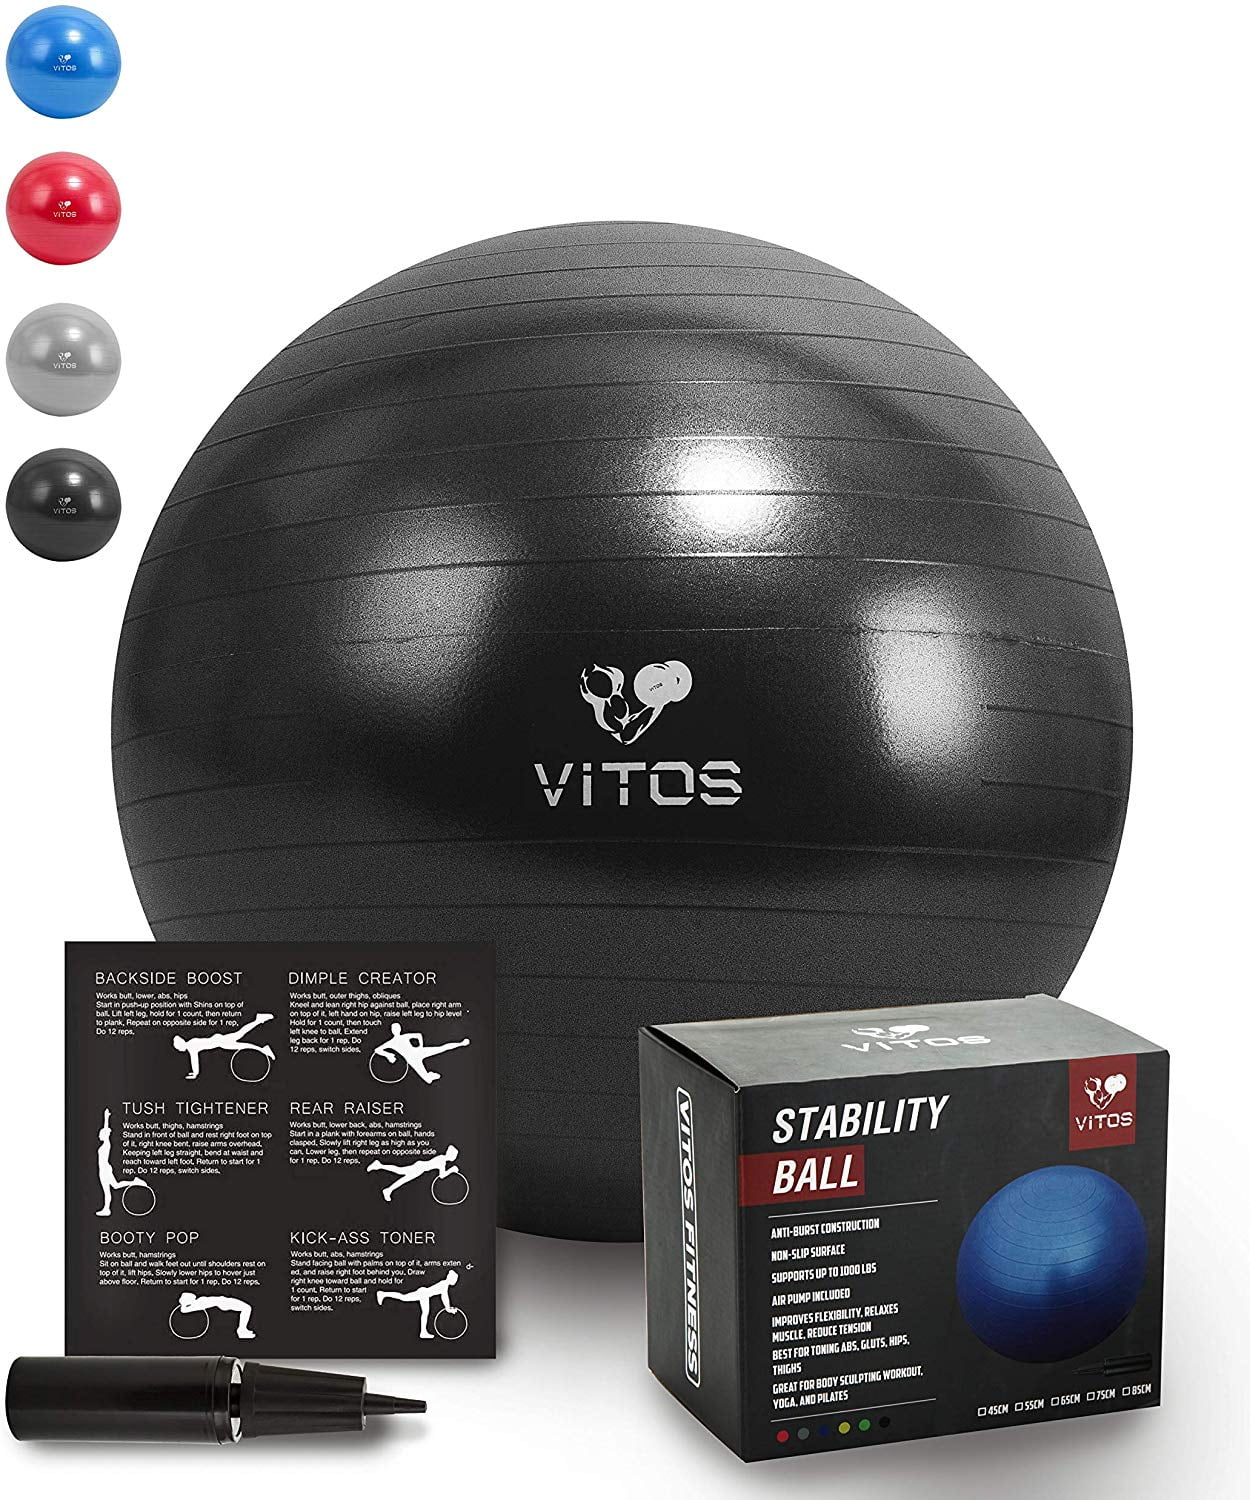 Extra Thick Non Slip Supports 2200LB for Fitness Stability Birth Balance Pilates Workout Guide Quick Pump Included Professional Quality Design Vitos Anti Burst Exercise Yoga Ball